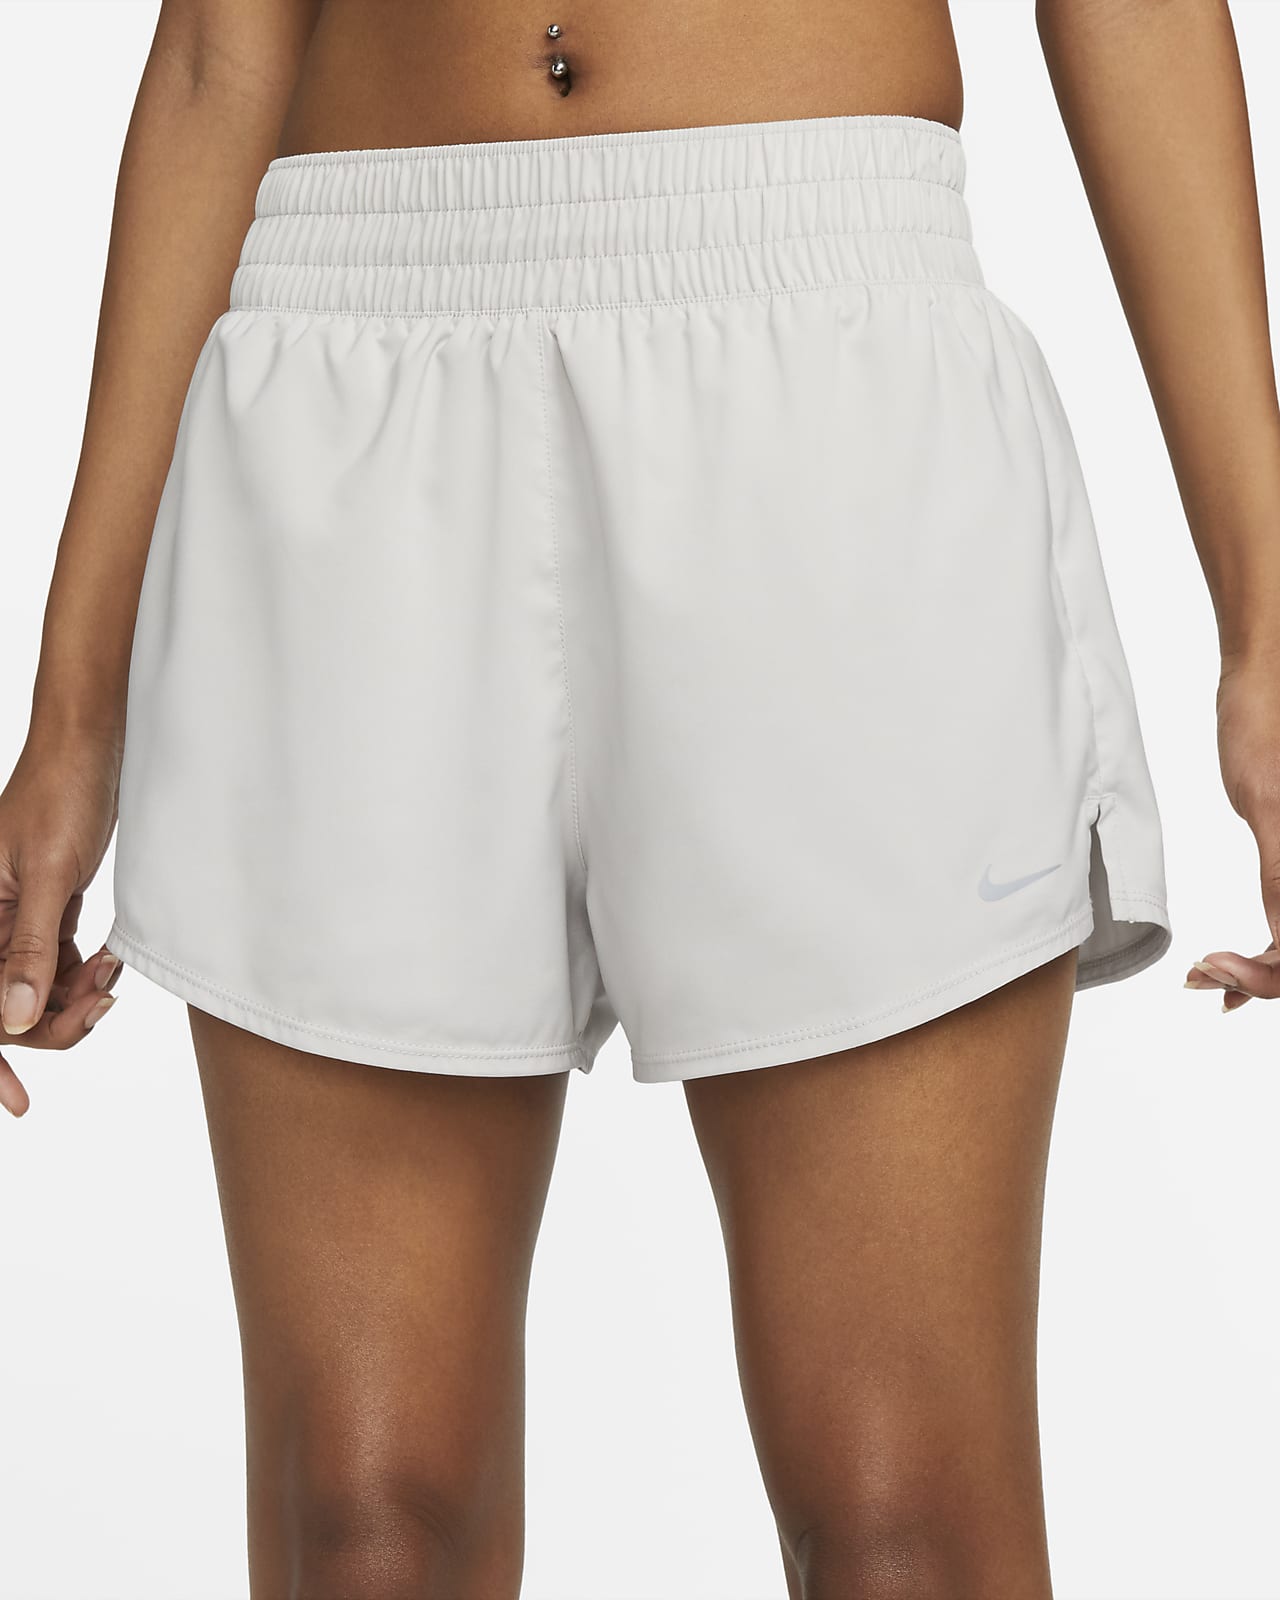 WOMEN'S NIKE DRI-FIT ONE SHORT  Performance Running Outfitters